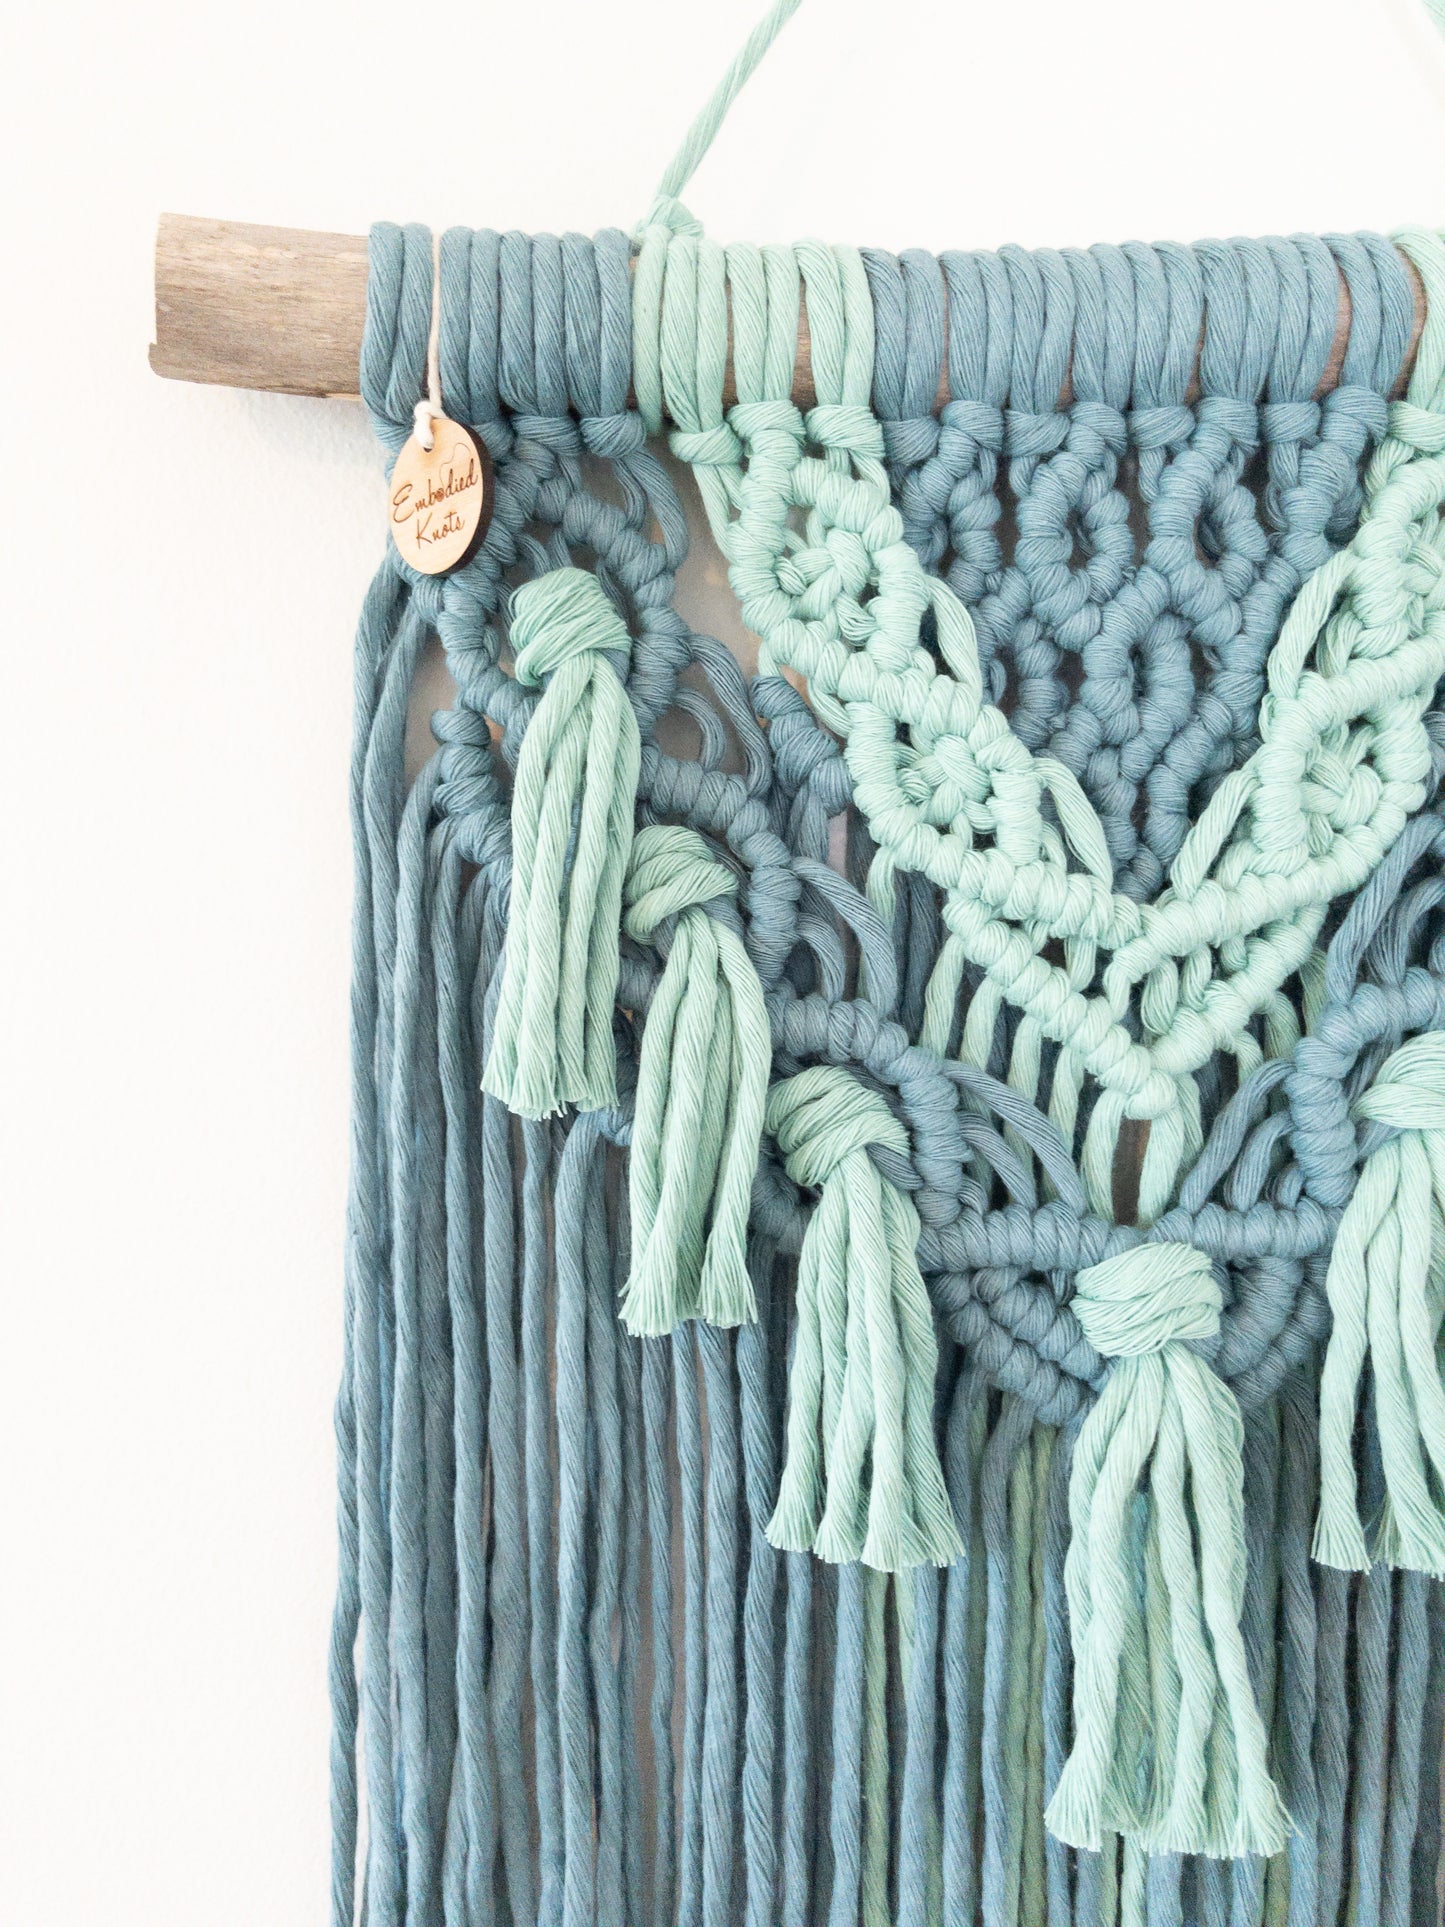 Blue & Turquoise Layered Wall Hanging